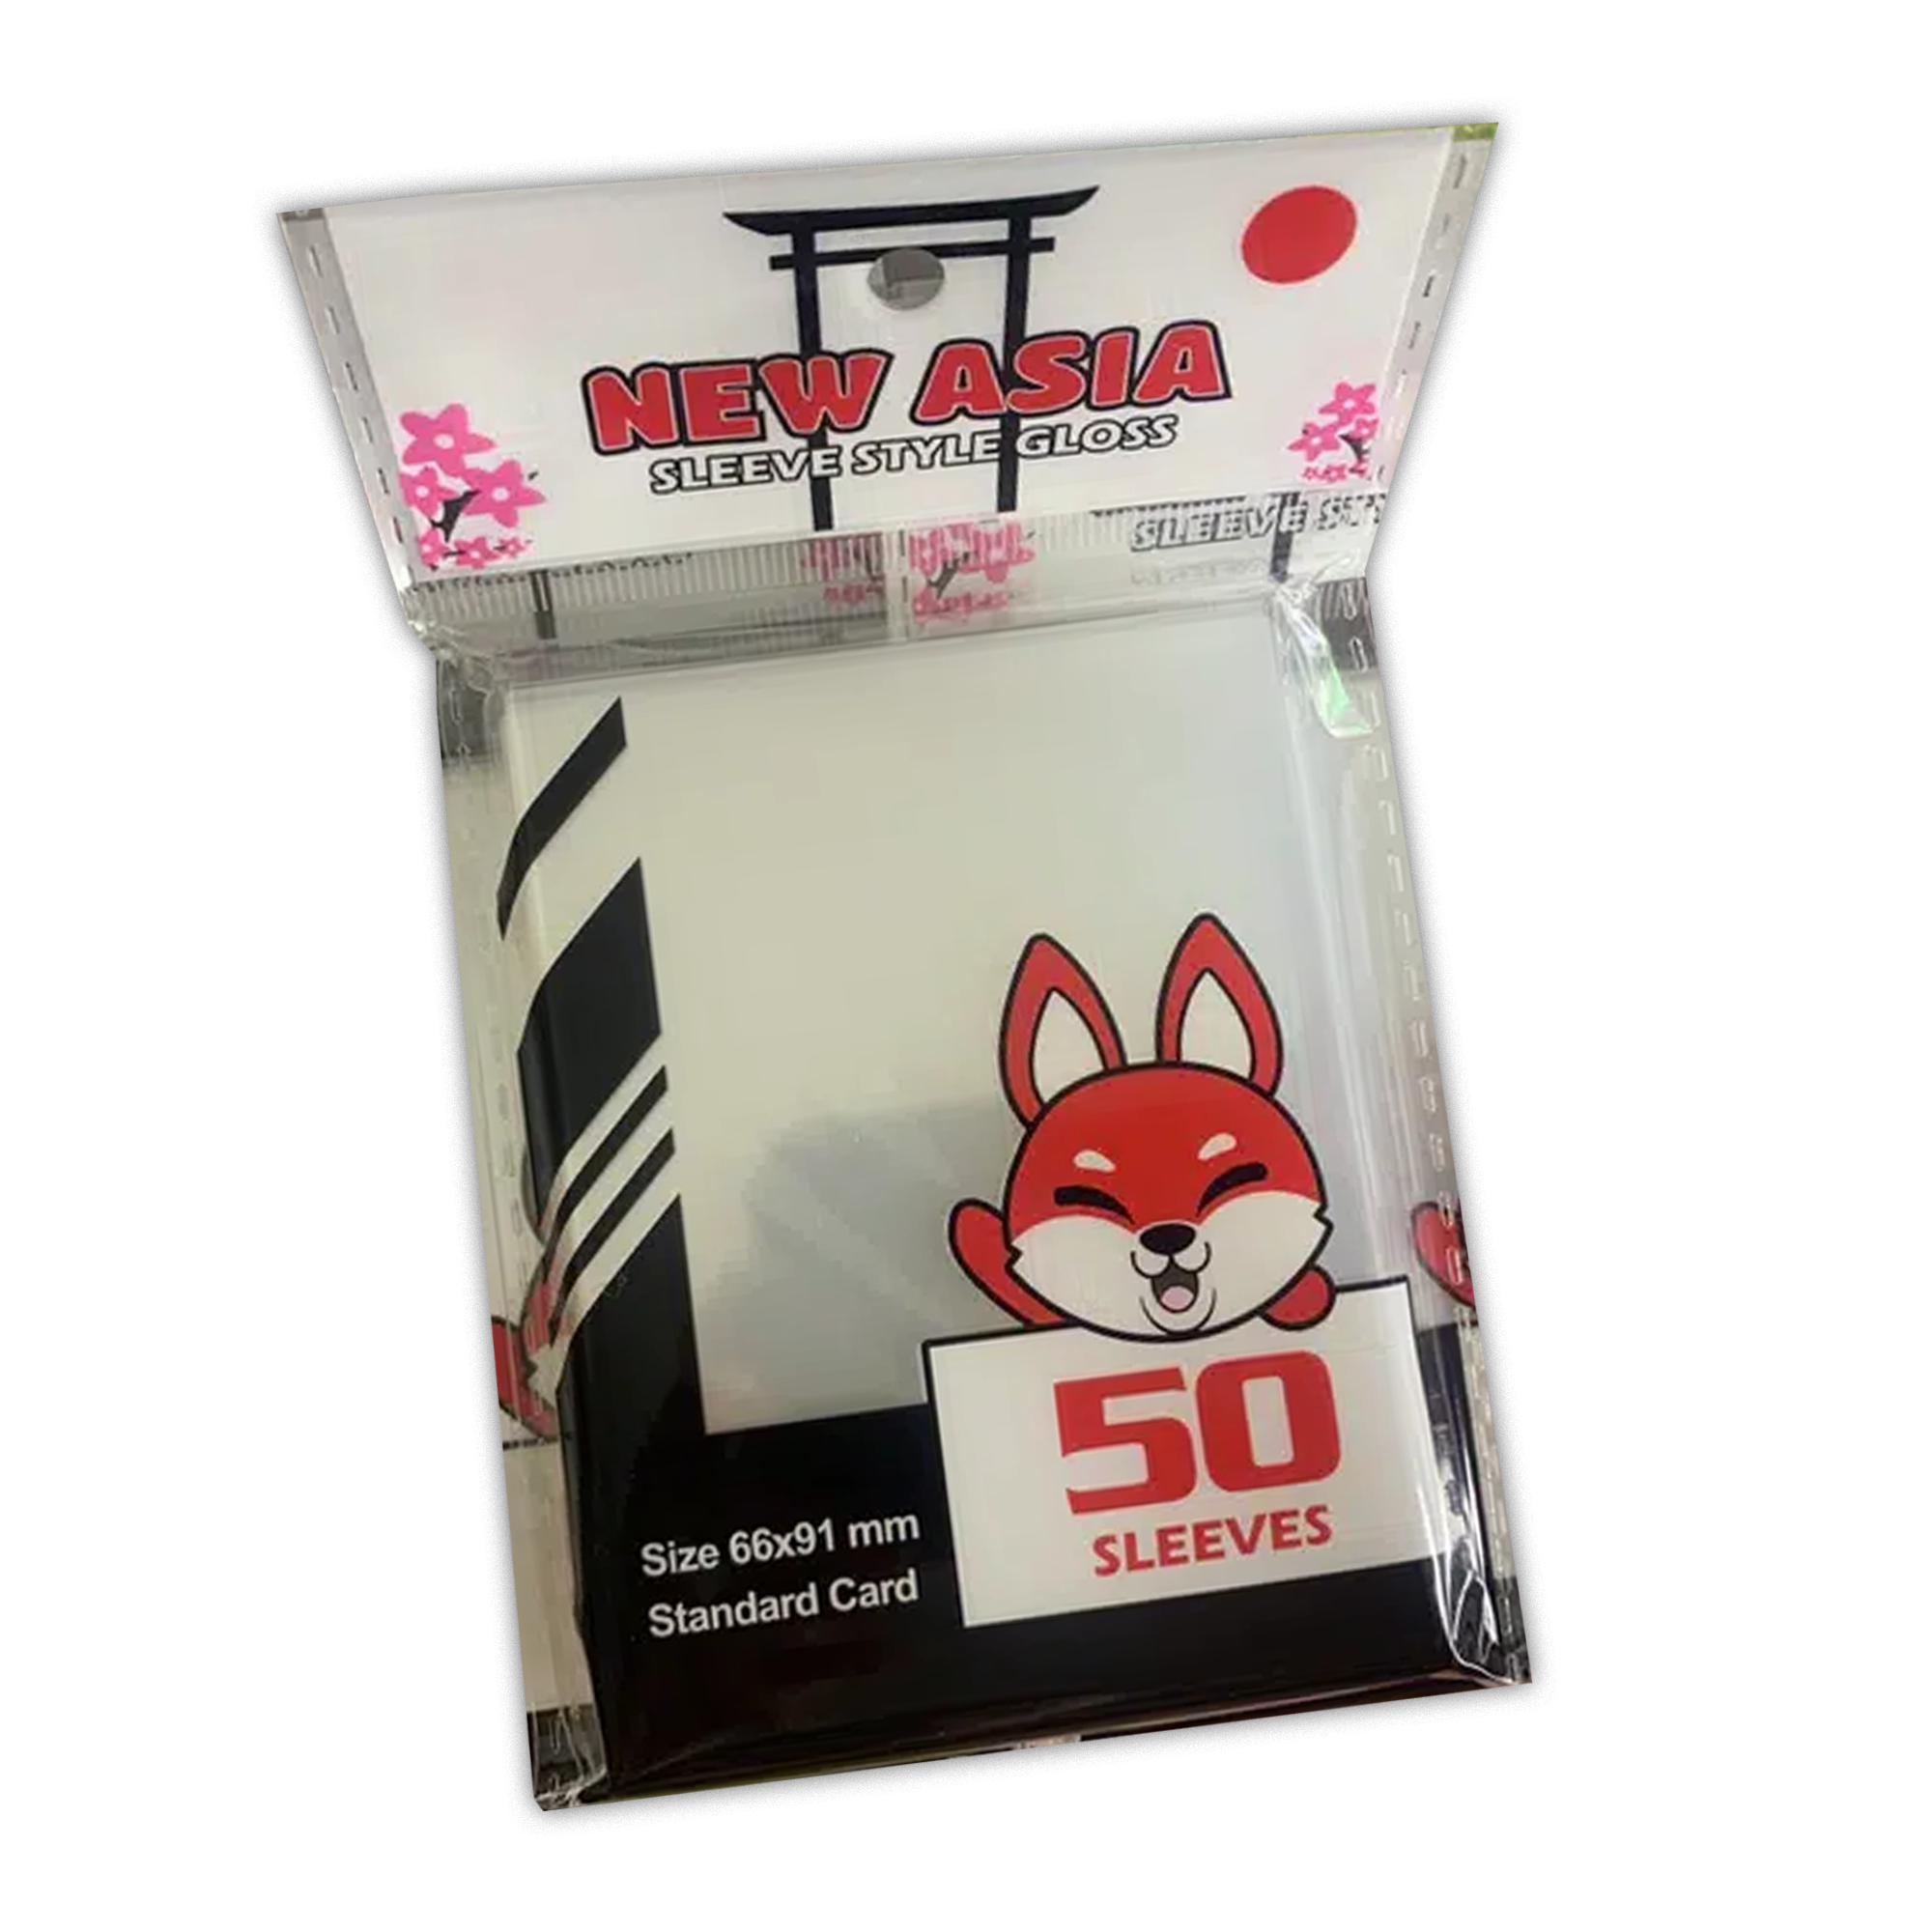 50 Sleeves Gloss - New Asia